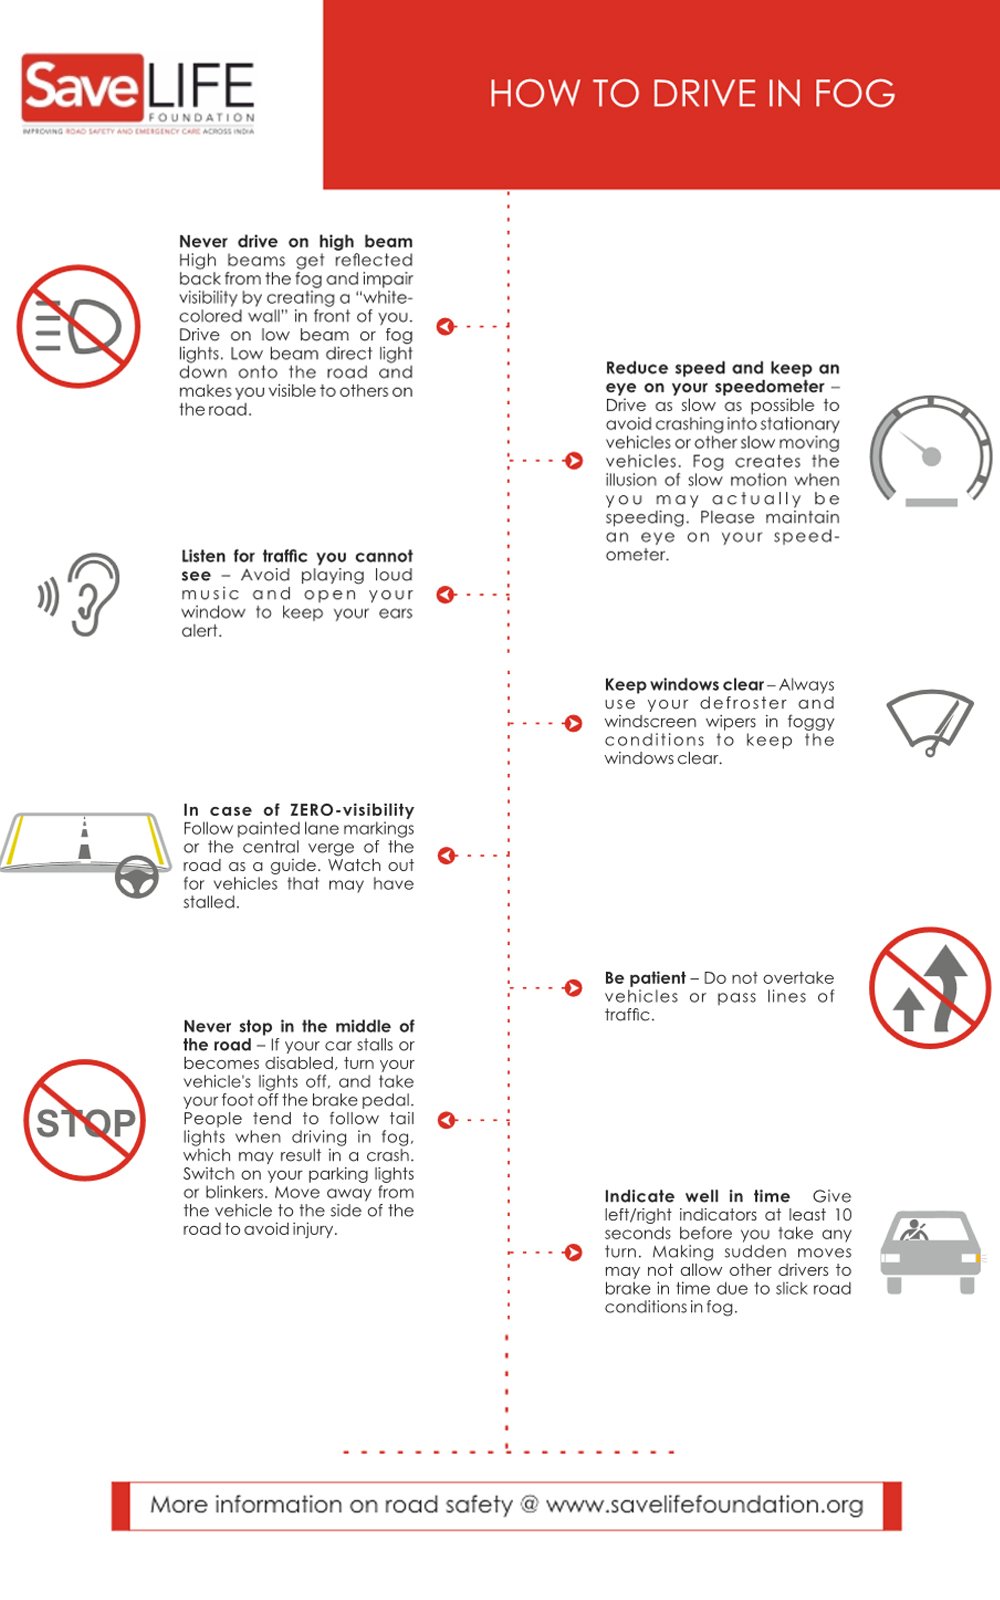 Every Year 9000+ Car Crashes Occur Due To Fog, Here Are Few Life Saving Driving Tips